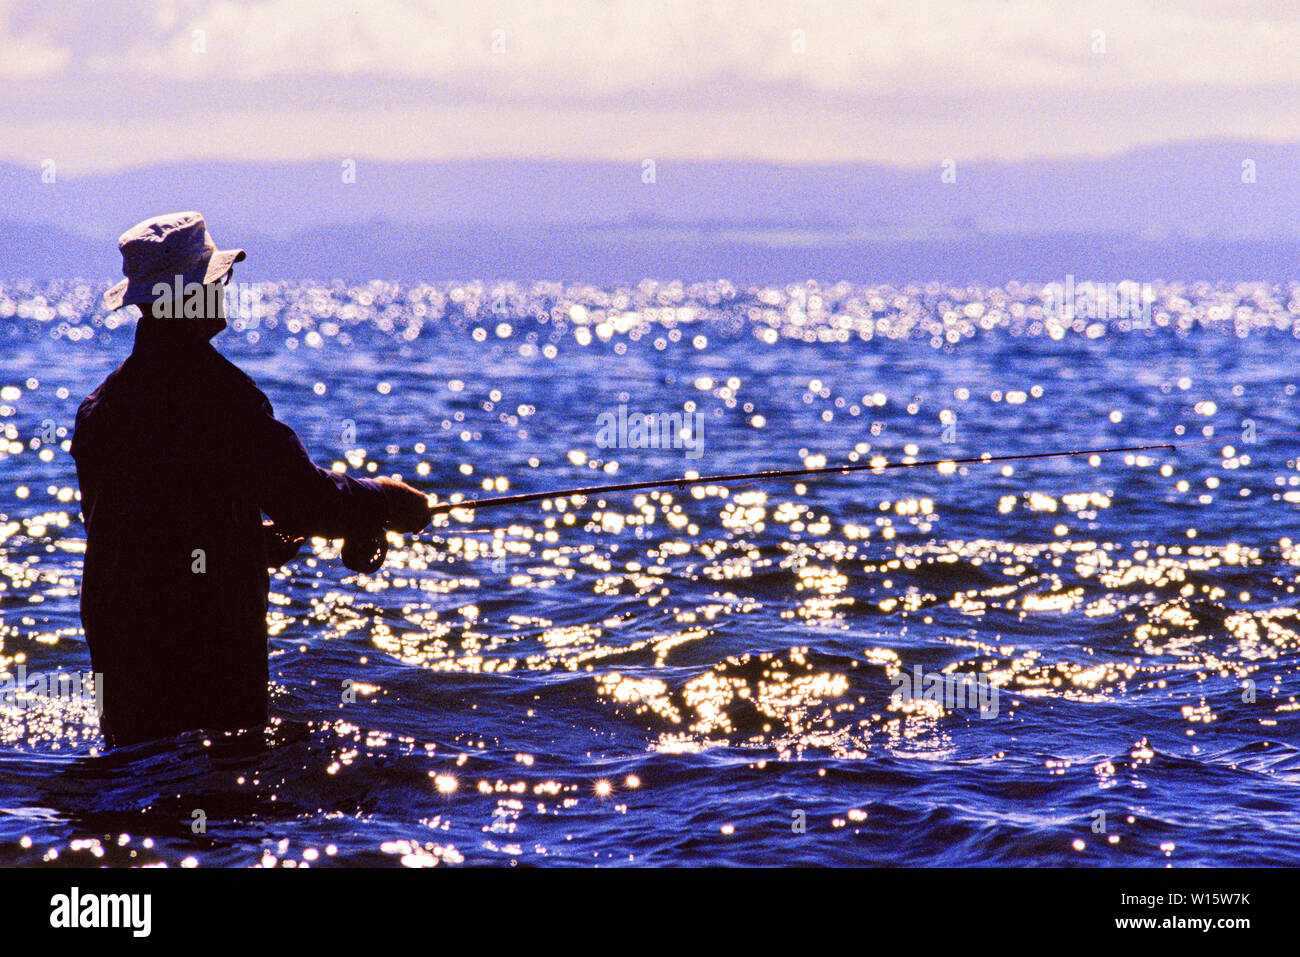 New Zealand, North Island. Men fishing in Lake Taupo, a noted trout fishery with stocks of introduced brown and rainbow trout. Photo taken November 19 Stock Photo